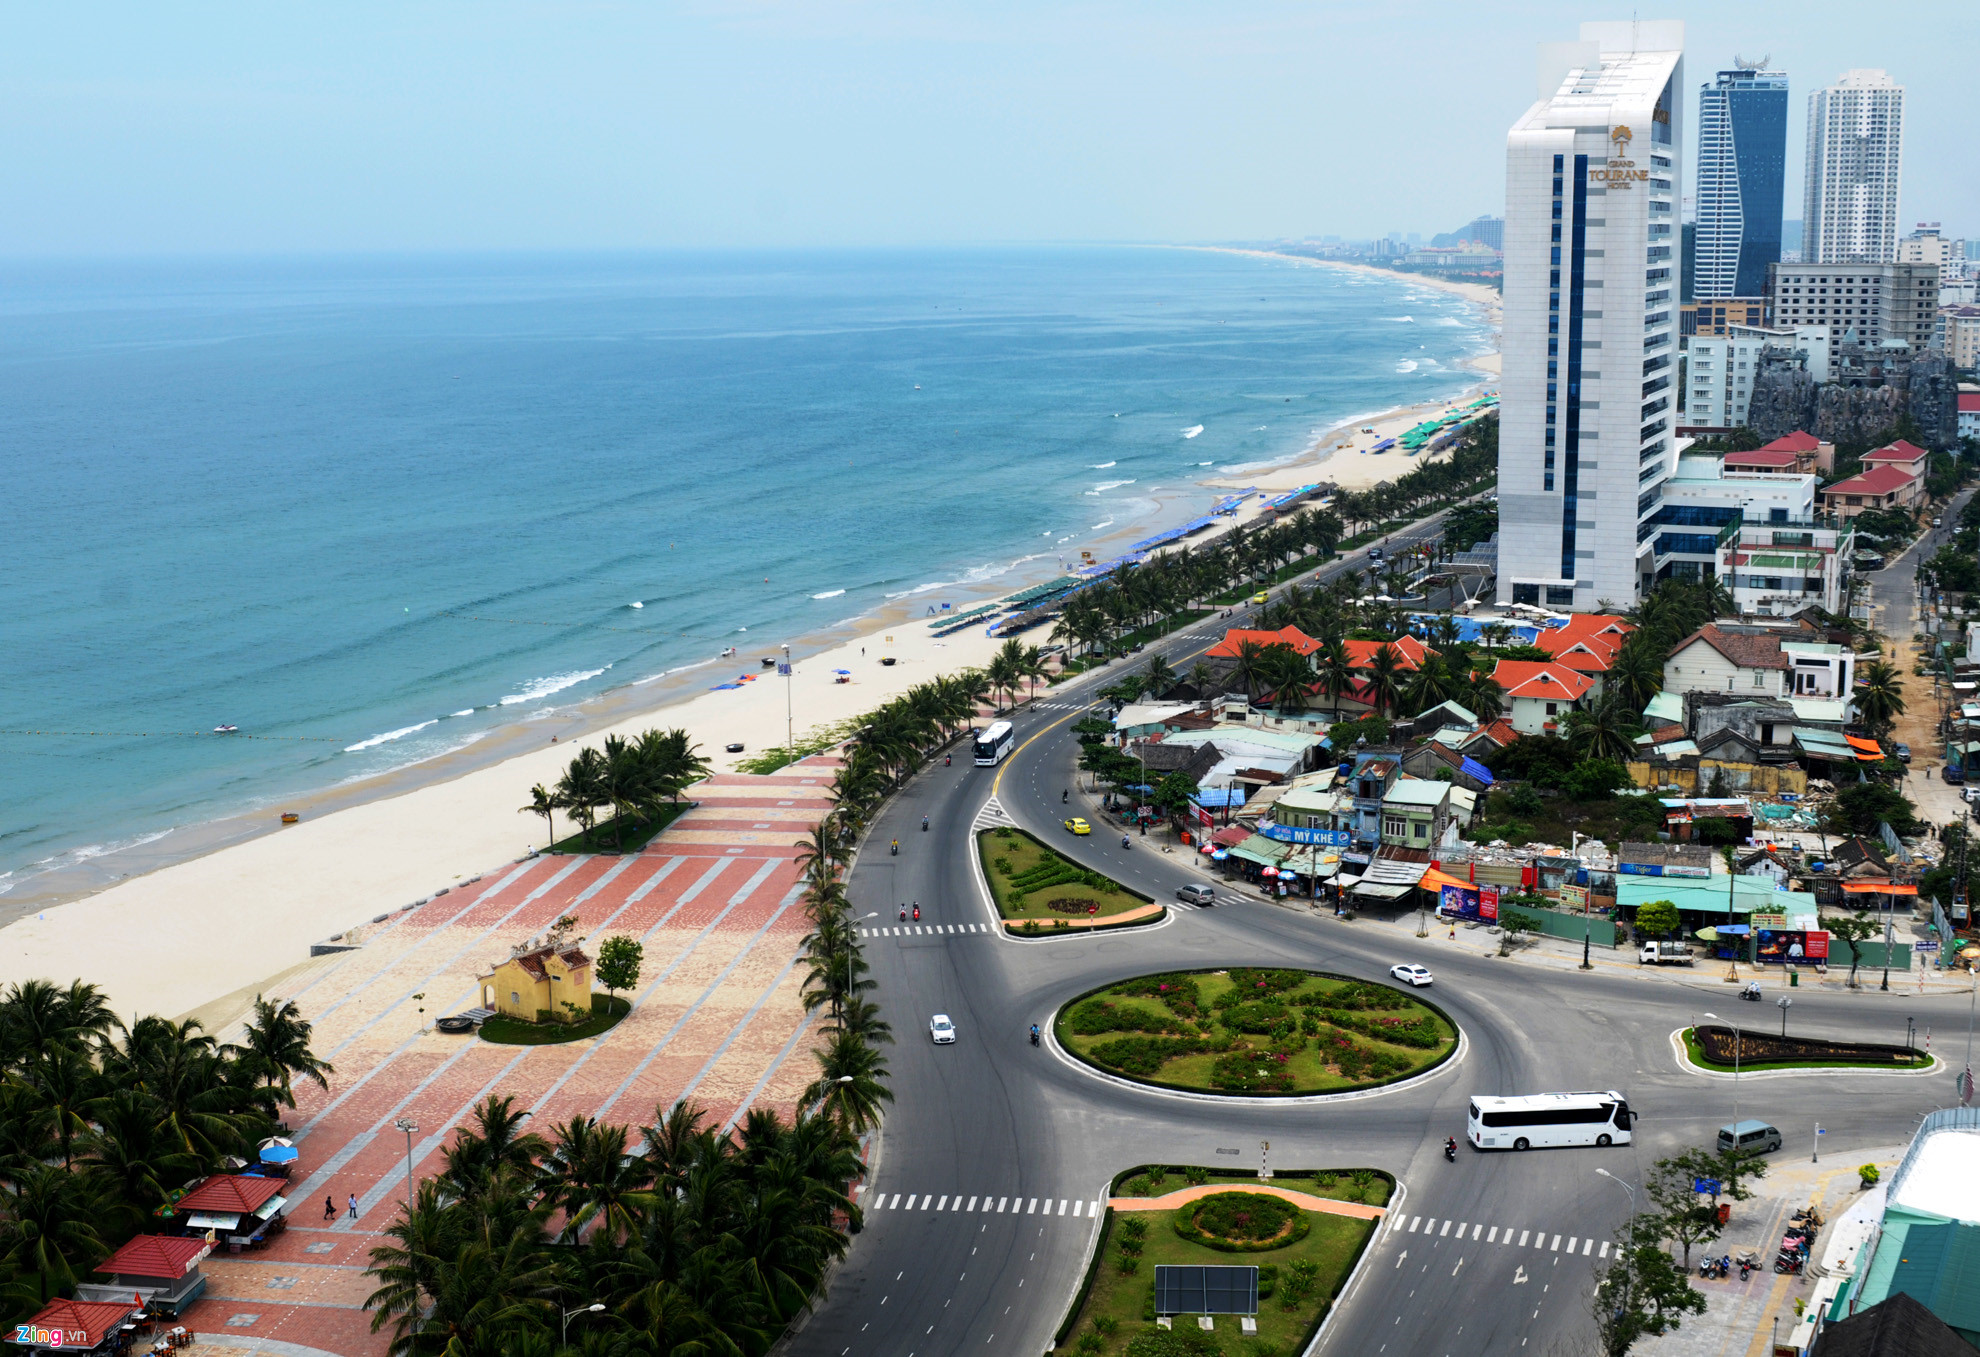 Let’s see the most livable place in Vietnam – Da Nang city